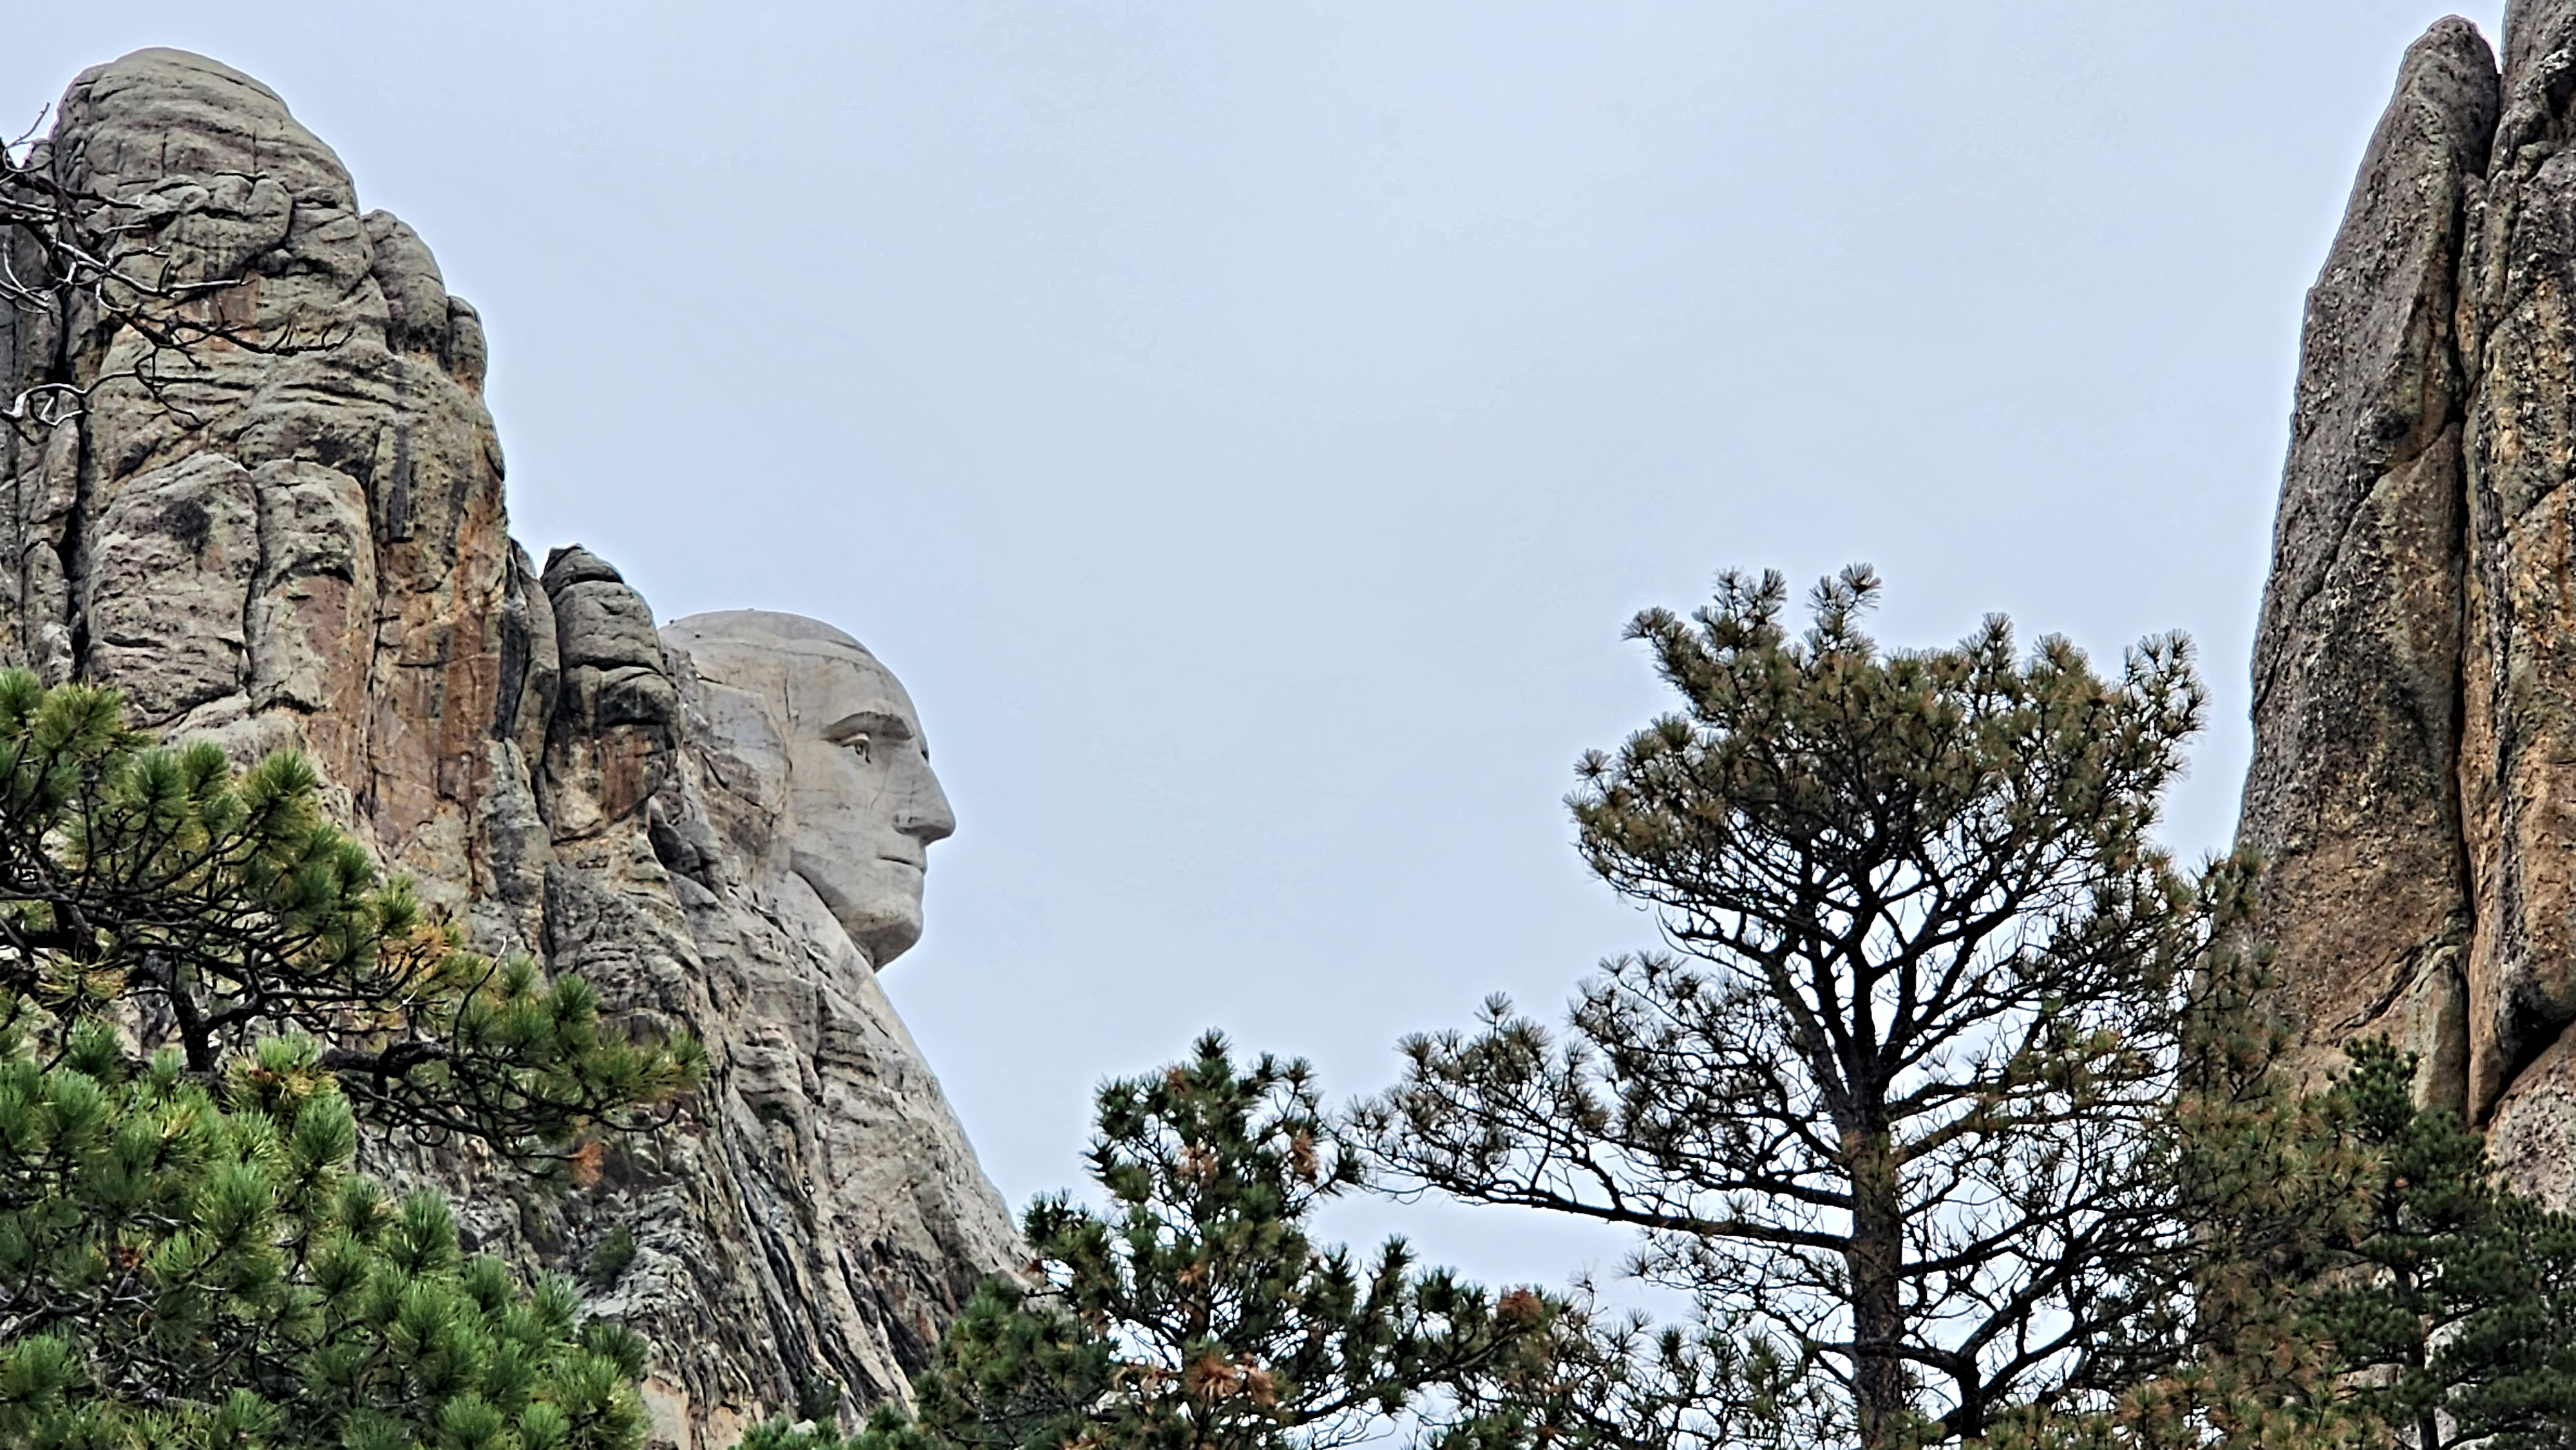 Mount Rushmore side view